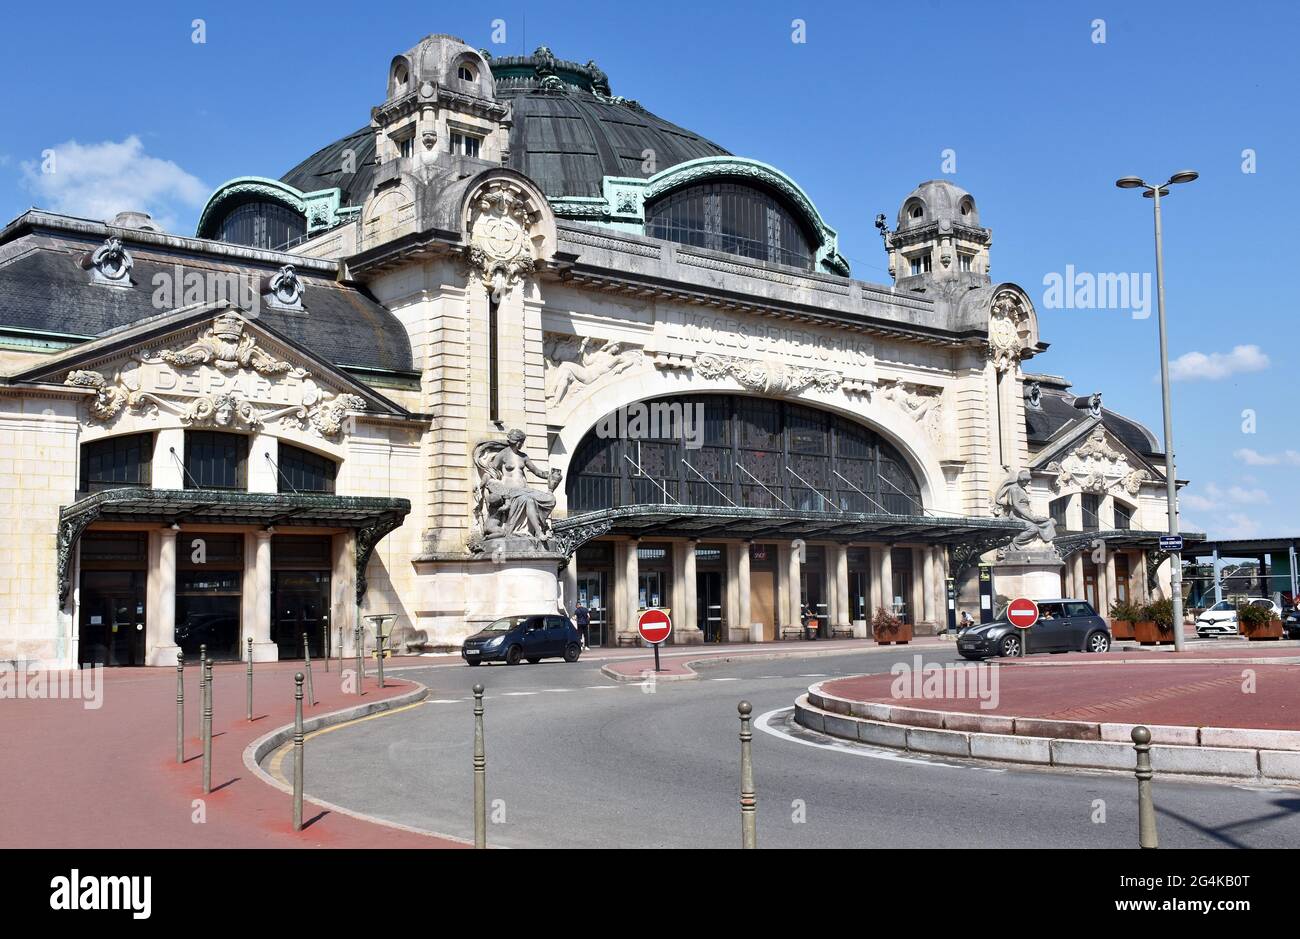 Limoges-Bénédictins railway station, a fantastic building, principally Beaux-Arts style, with Neo-Byzantine & Louis-Seize elements, Limoges, France Stock Photo